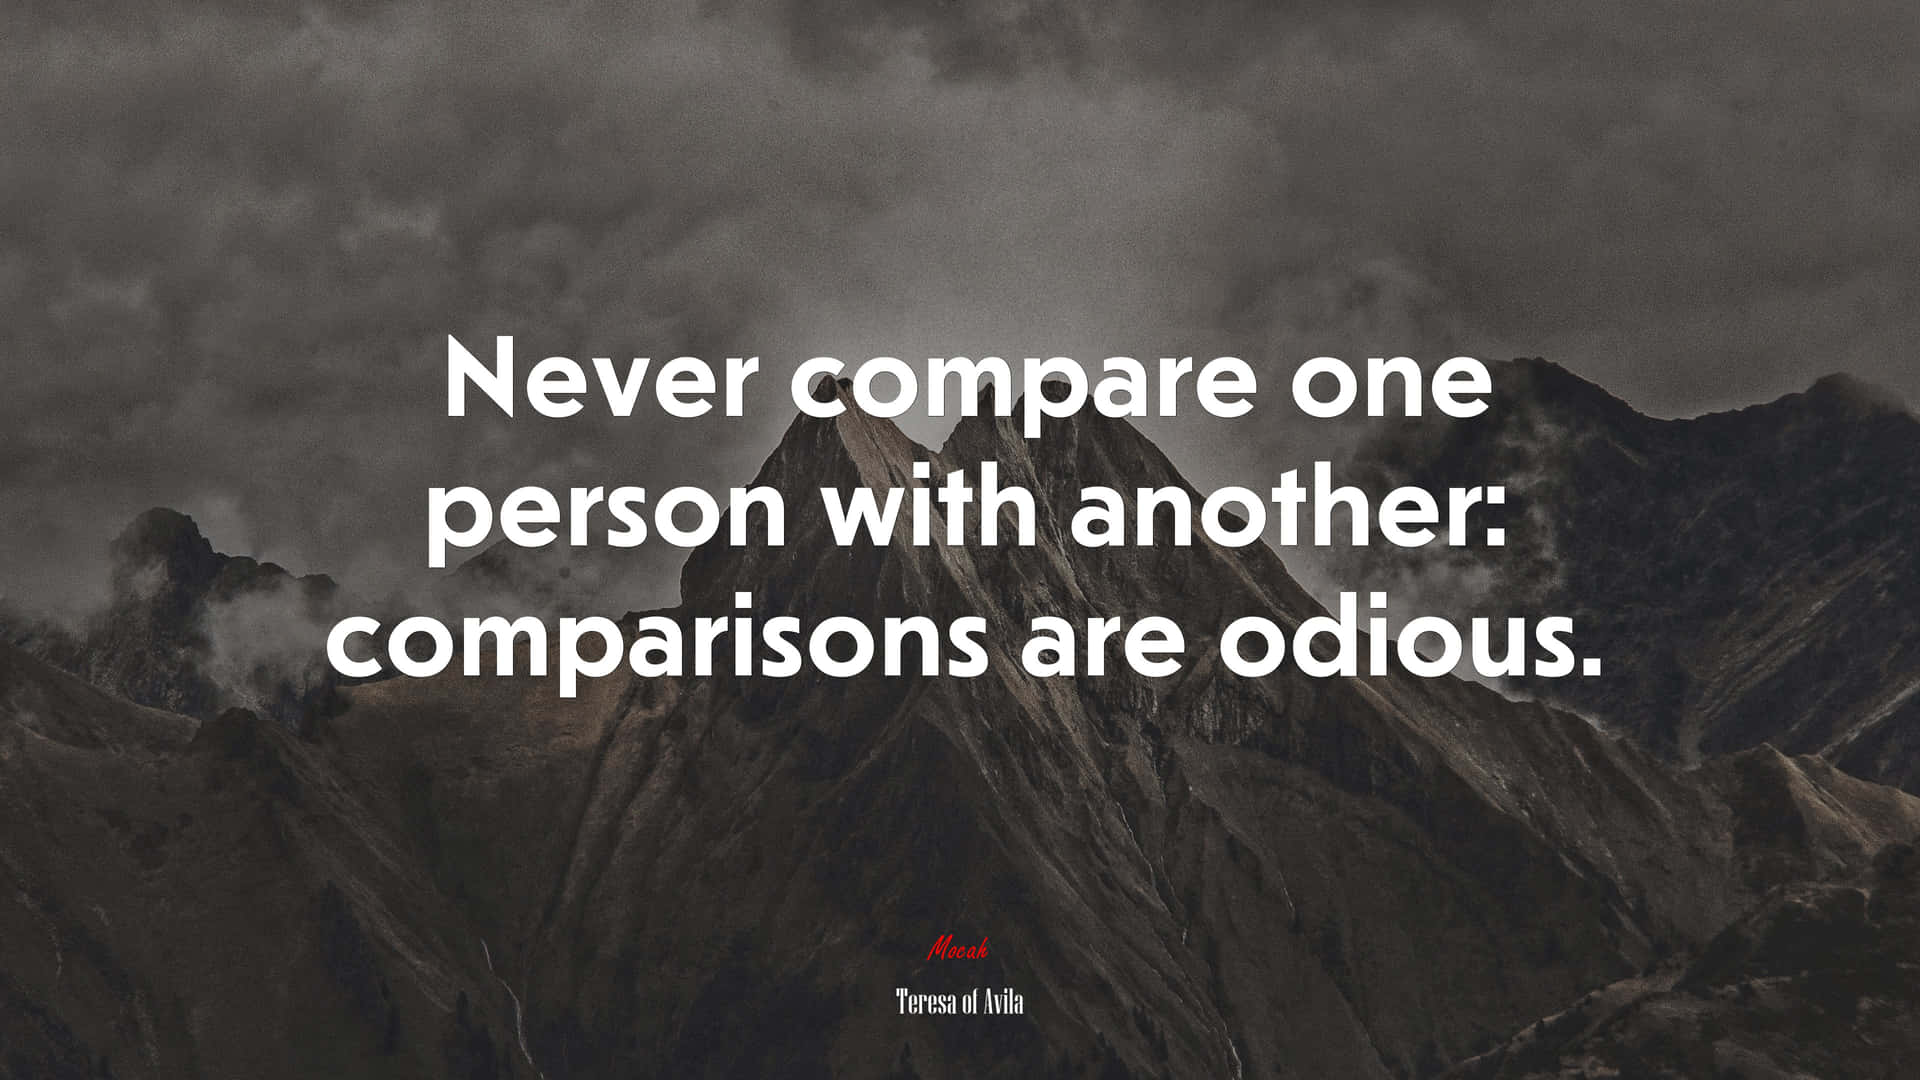 Odious Comparisons Quote Wallpaper